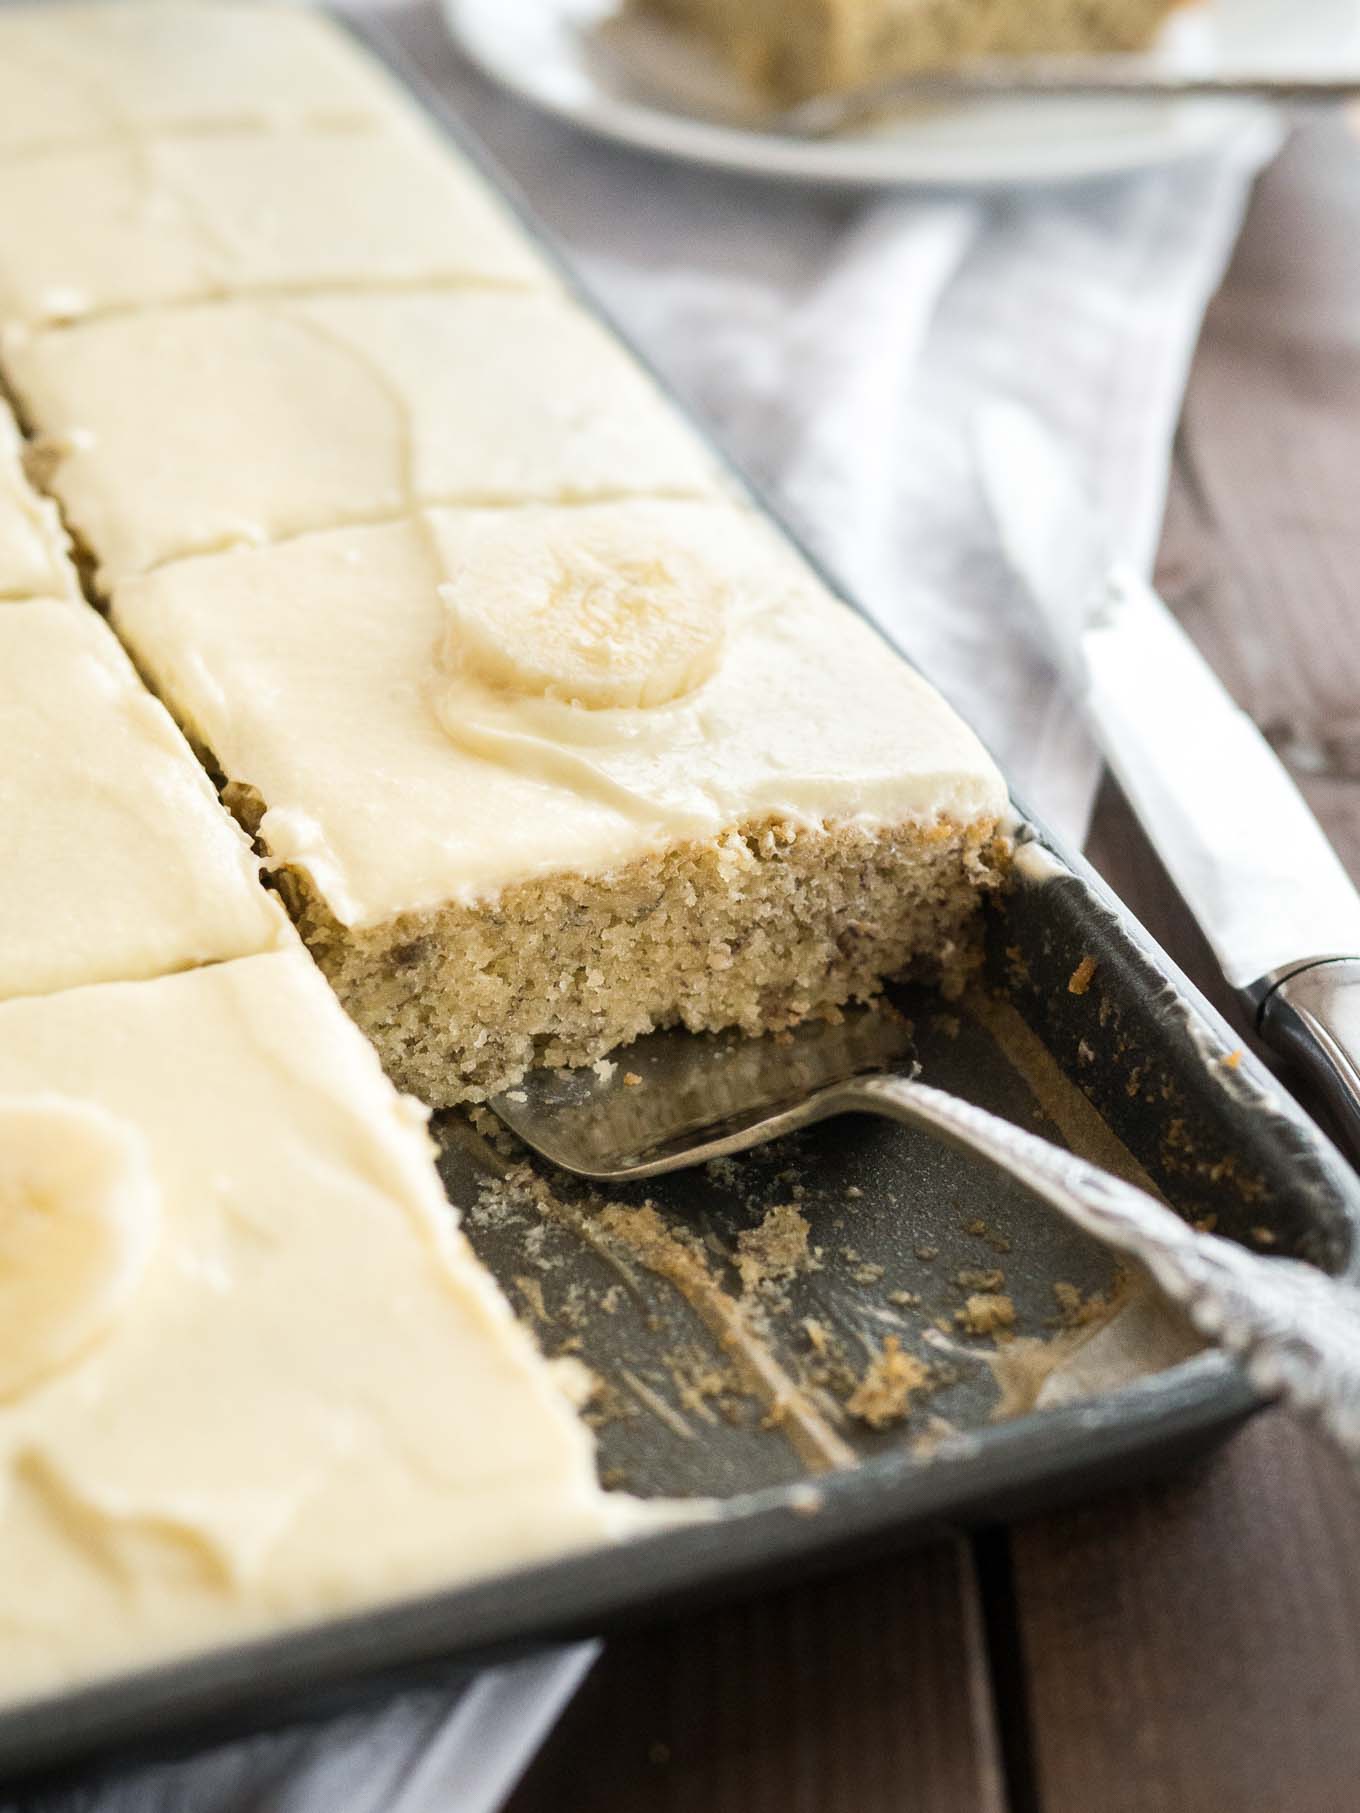 Easy Banana Cake - this fluffy and moist sheet cake has a mascarpone frosting on top and is ready in under 30 mins! A perfect cake to use overripe bananas.